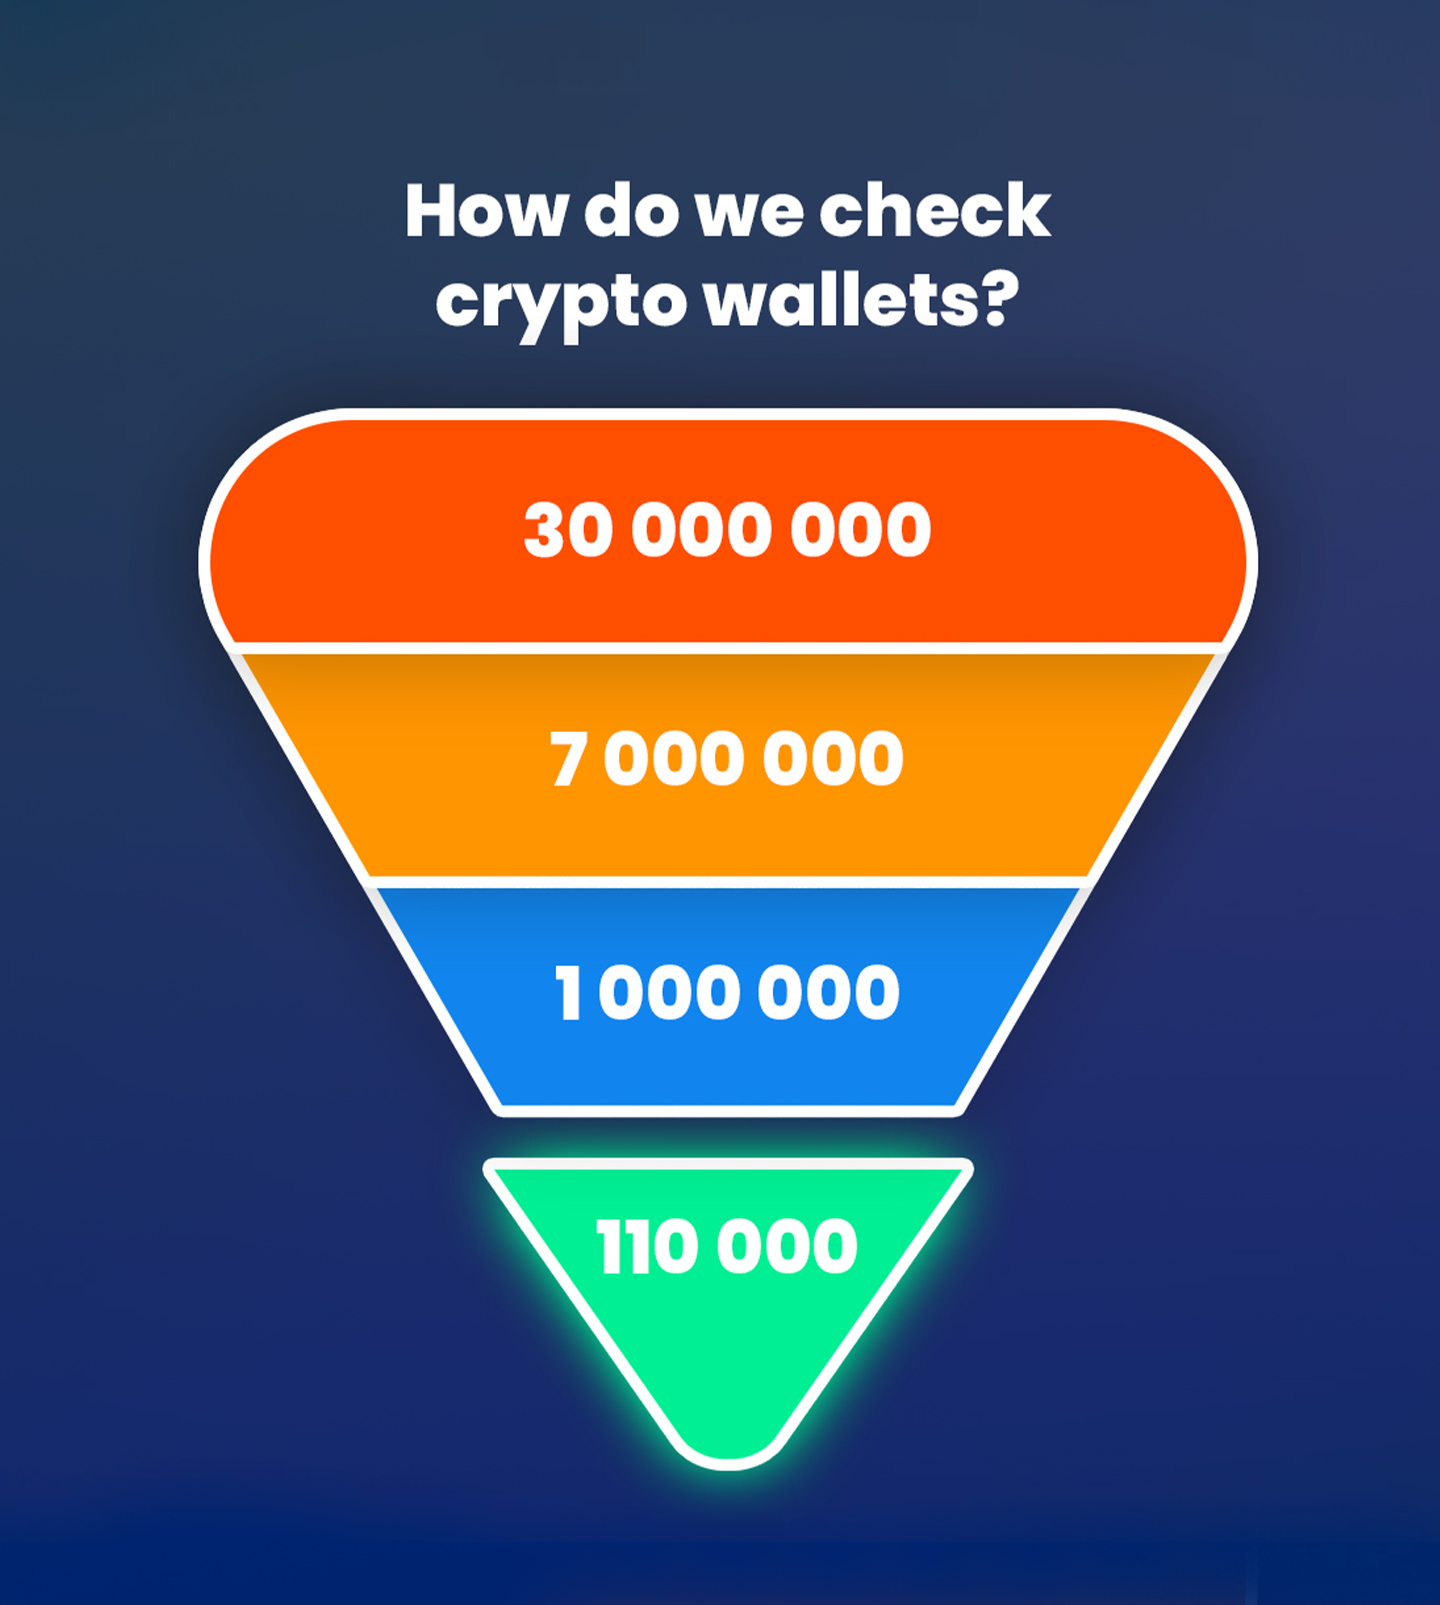 How do we check crypto wallets?